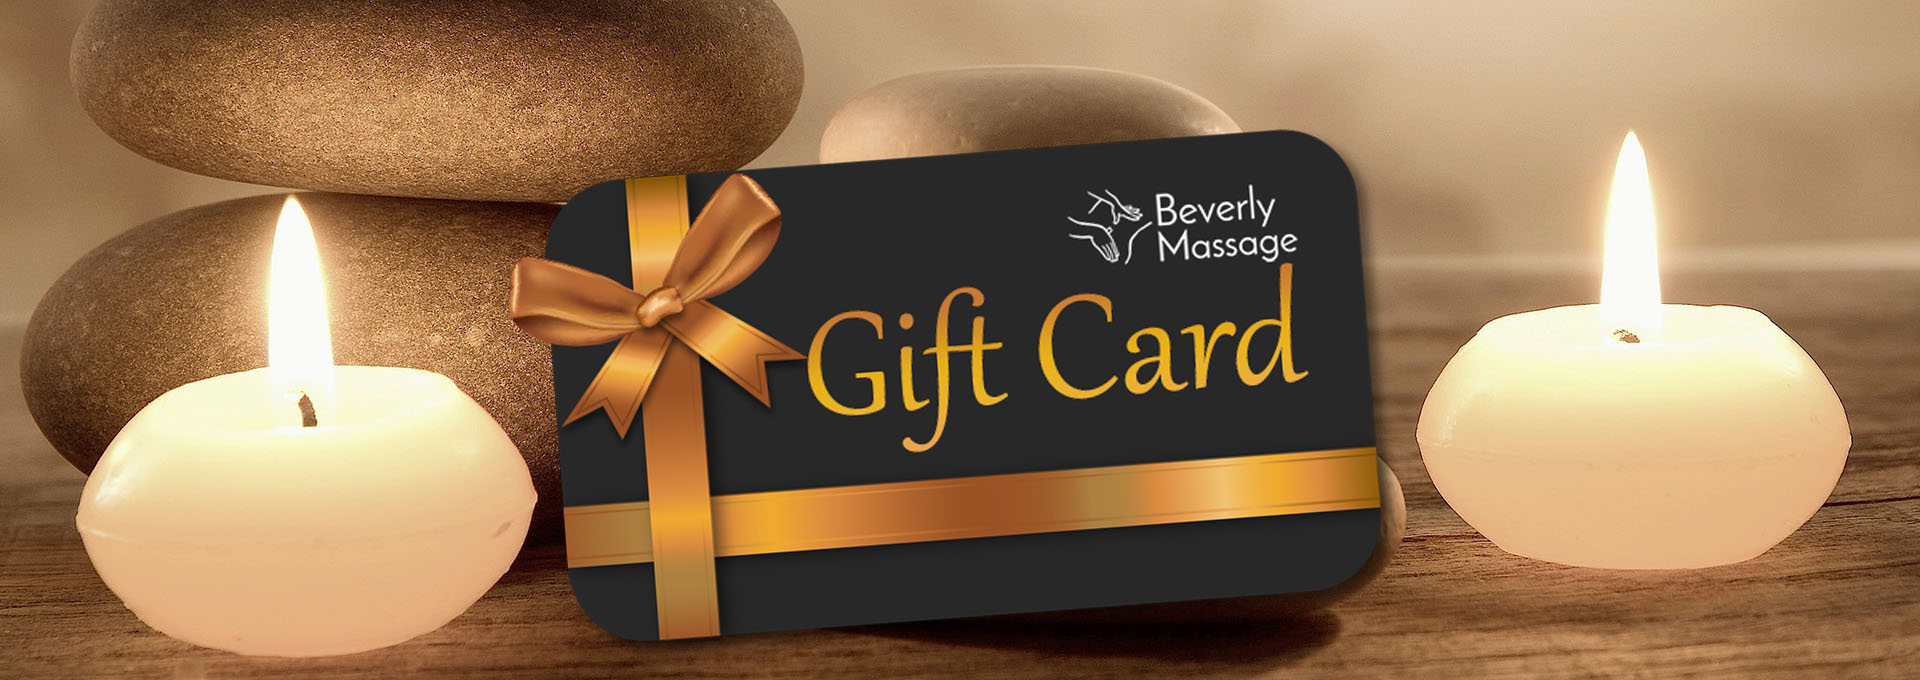 Give a massage as Gift